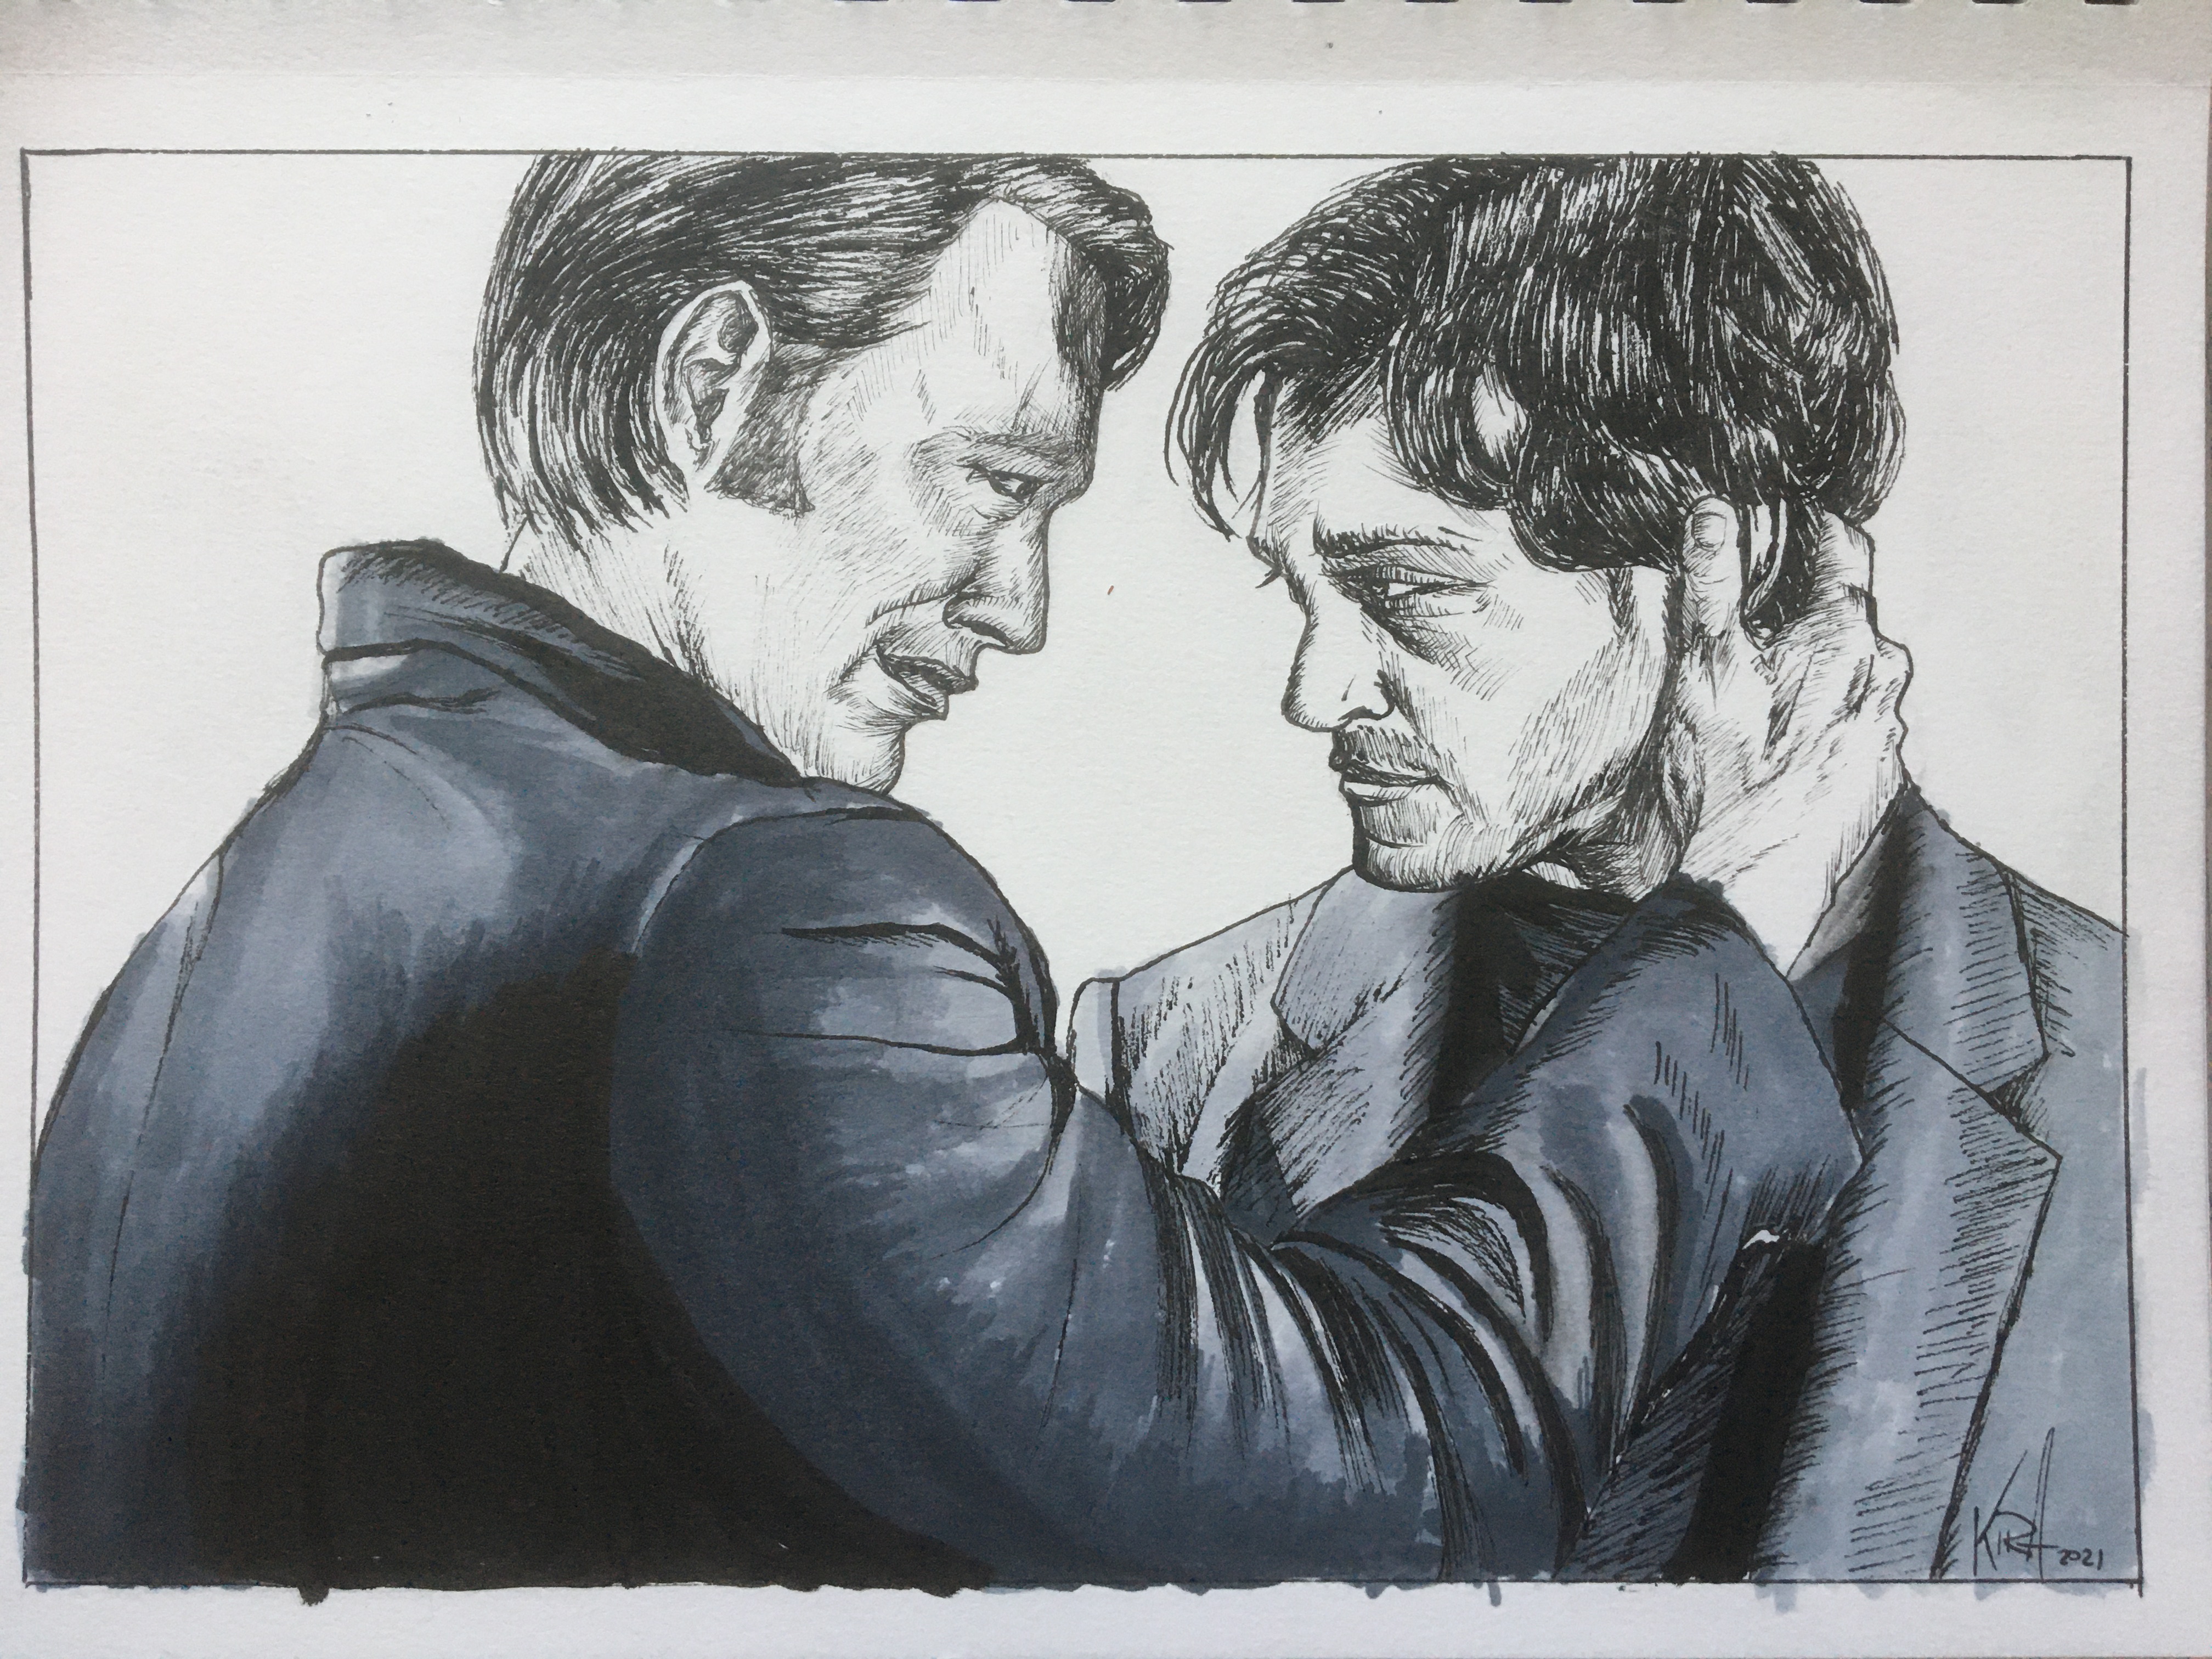 Drawing of Hannibal Lecter grasping the back of Will Graham's head